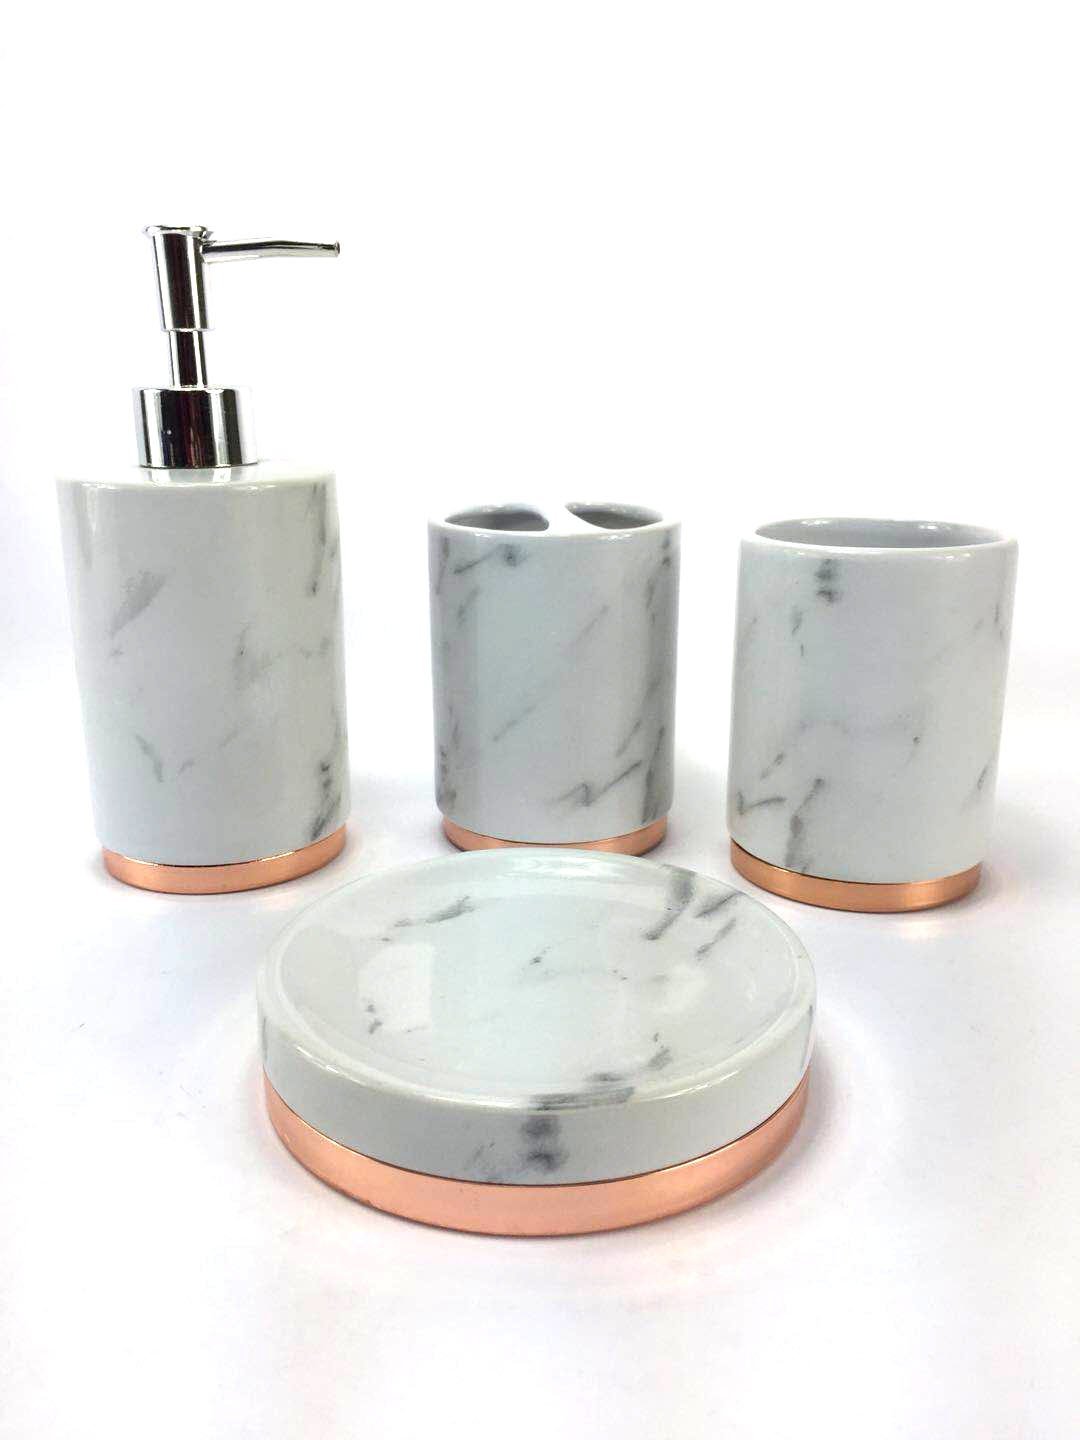 WPM 4 Piece Bathroom Accessory Set. Marble look with rose gold trim